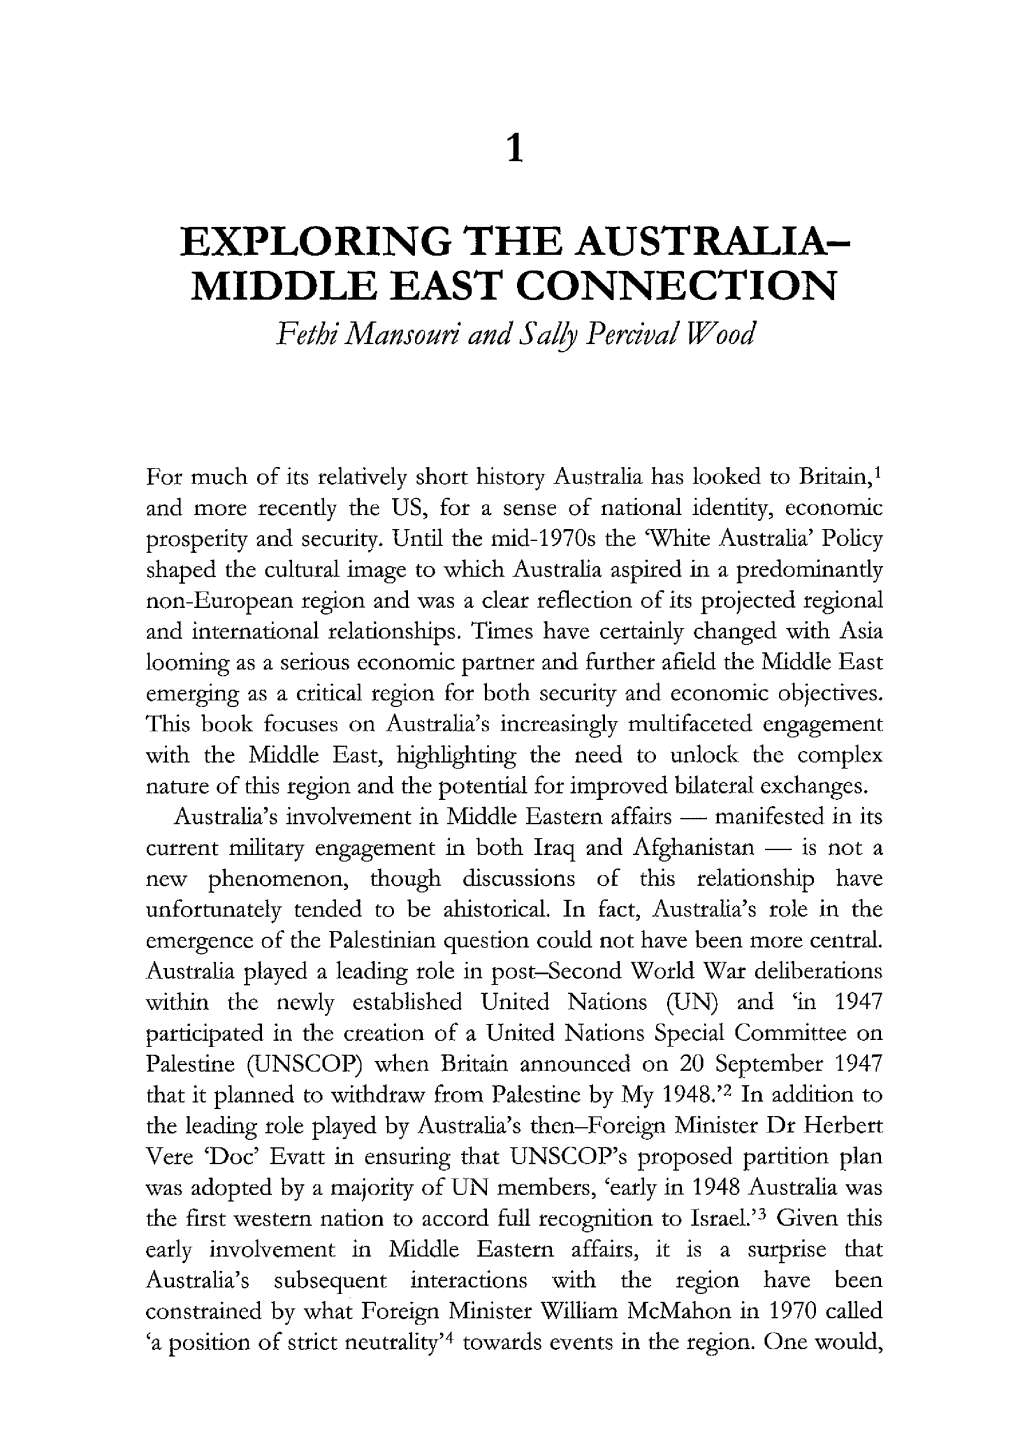 Exploring the Australia- Middle East Connection